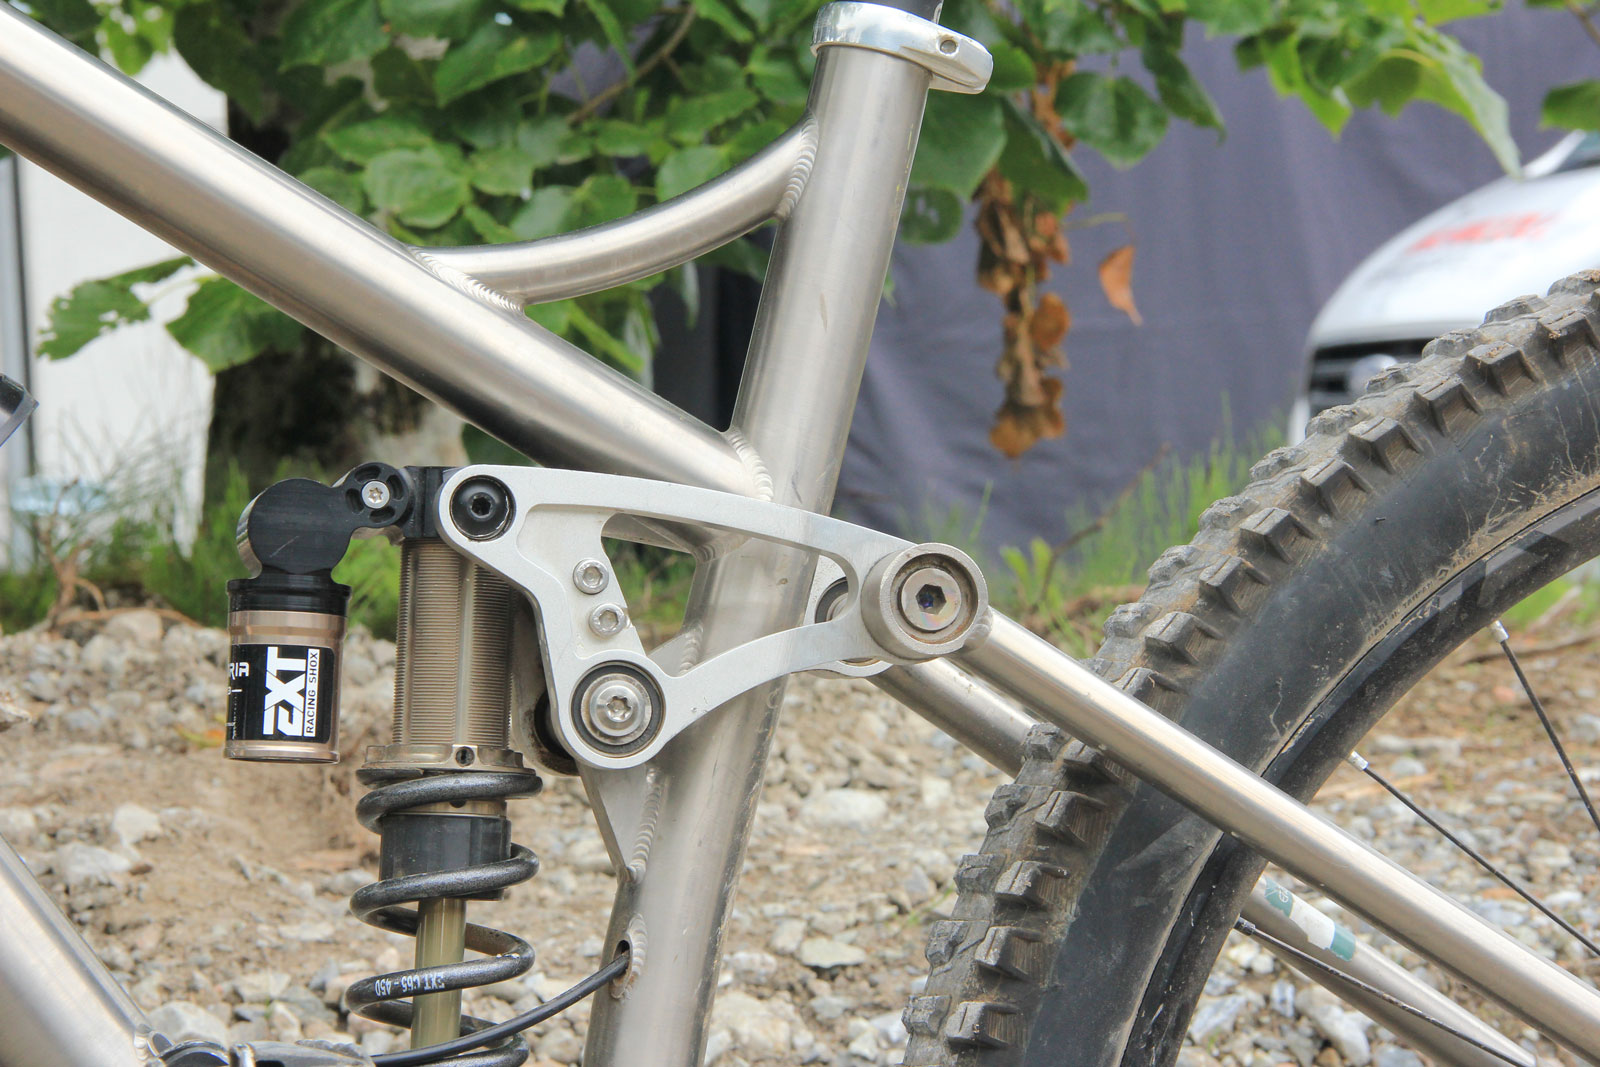 A Closer Look at the Forbidden DH Bike at Fort William World Champs -  Bikerumor